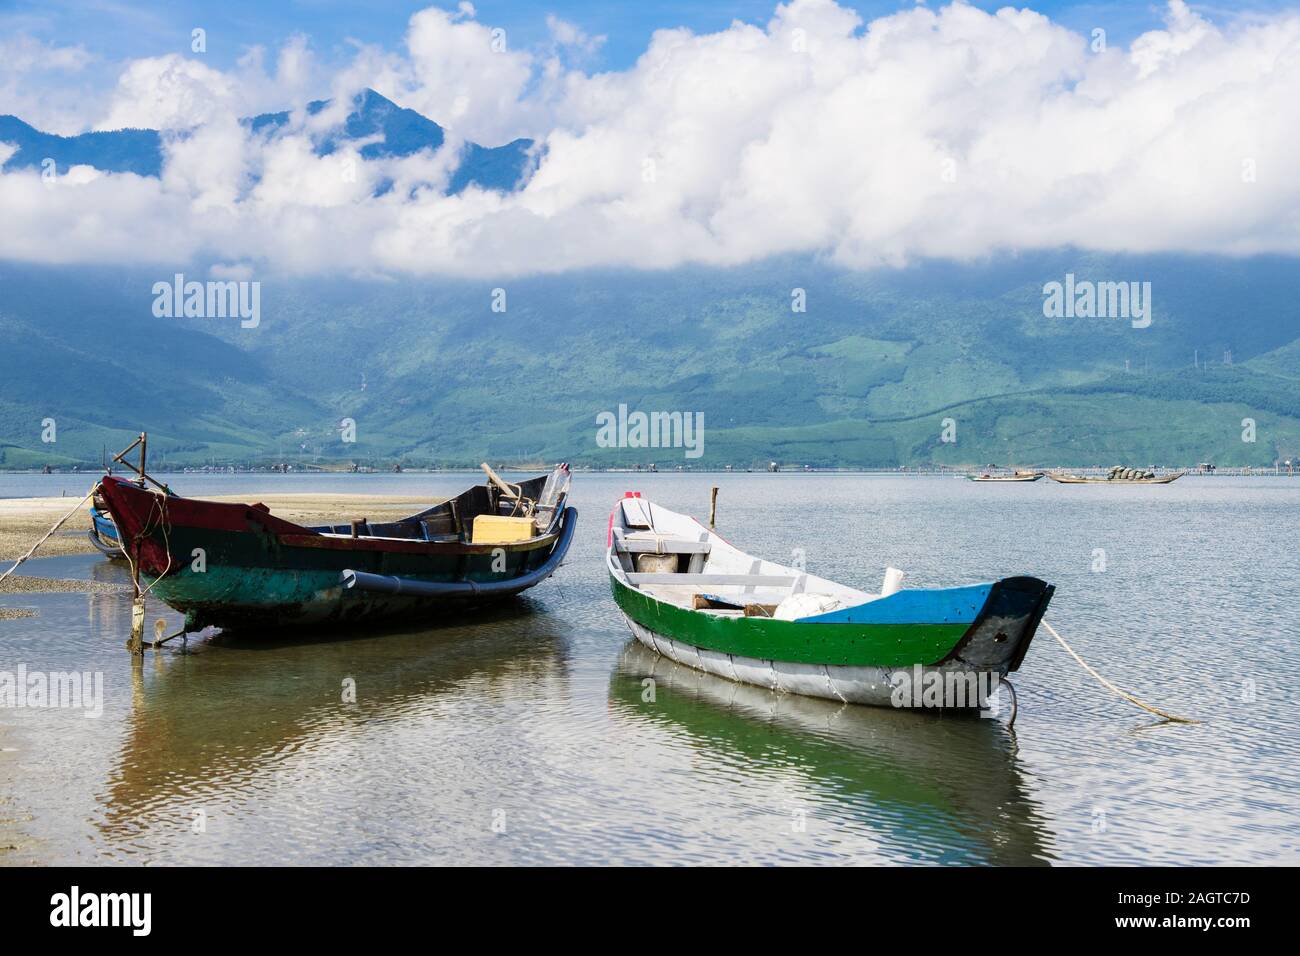 Small traditional fishing boats on Lap An Lagoon with mountains beyond in Bach Ma National Park. Lang Co, Phu Loc, Thua Thien Hue, Vietnam, Asia Stock Photo